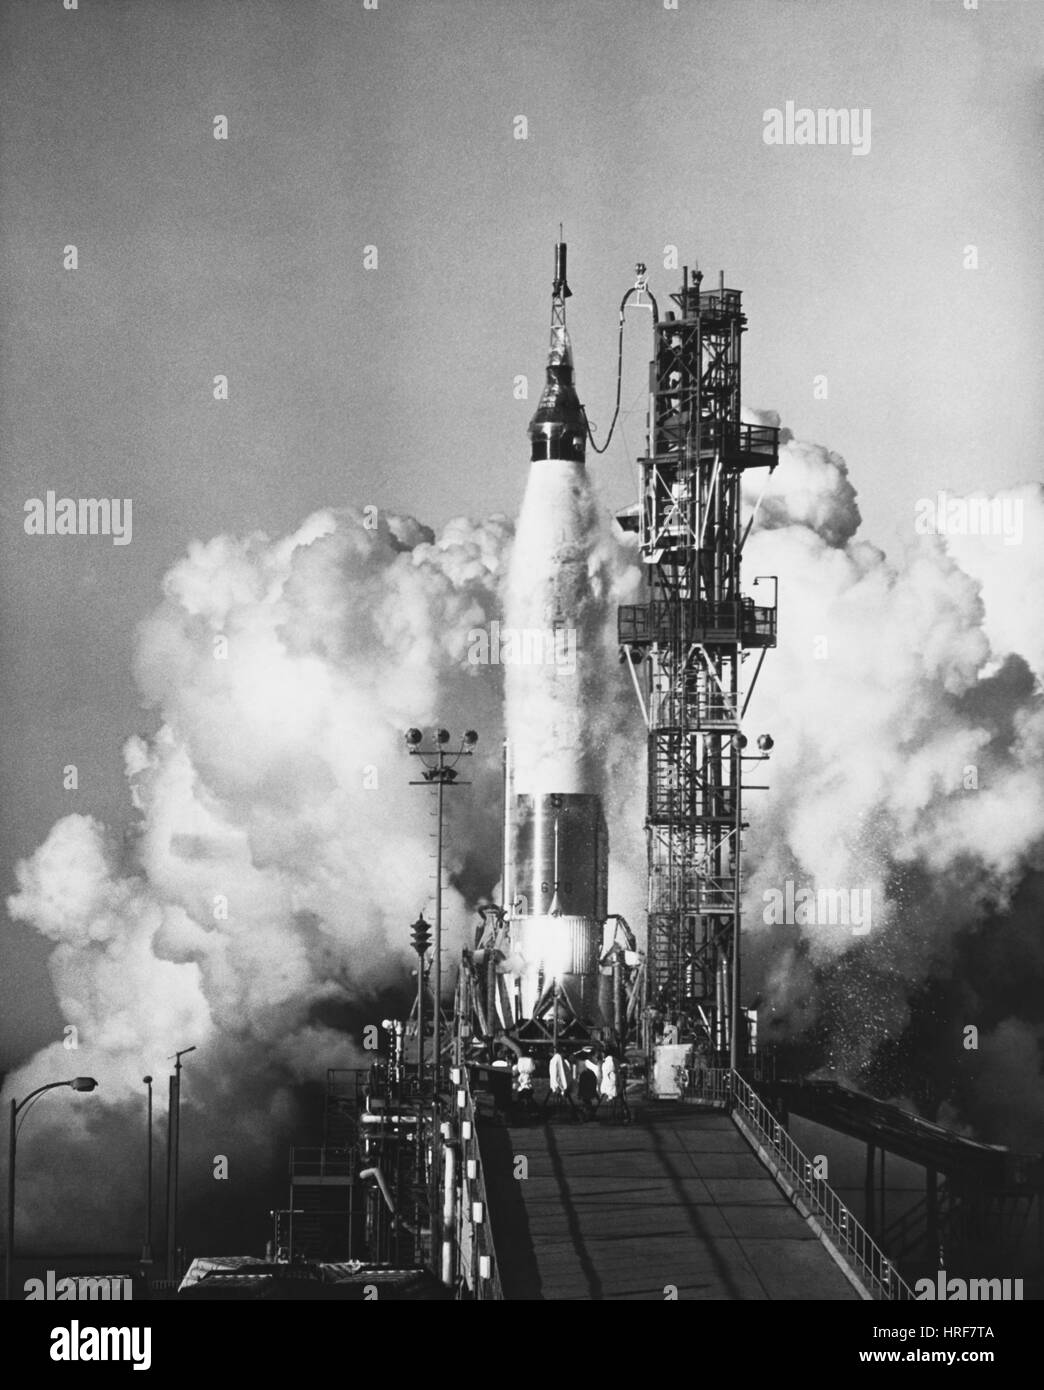 Atlas rocket launch Black and White Stock Photos & Images - Alamy